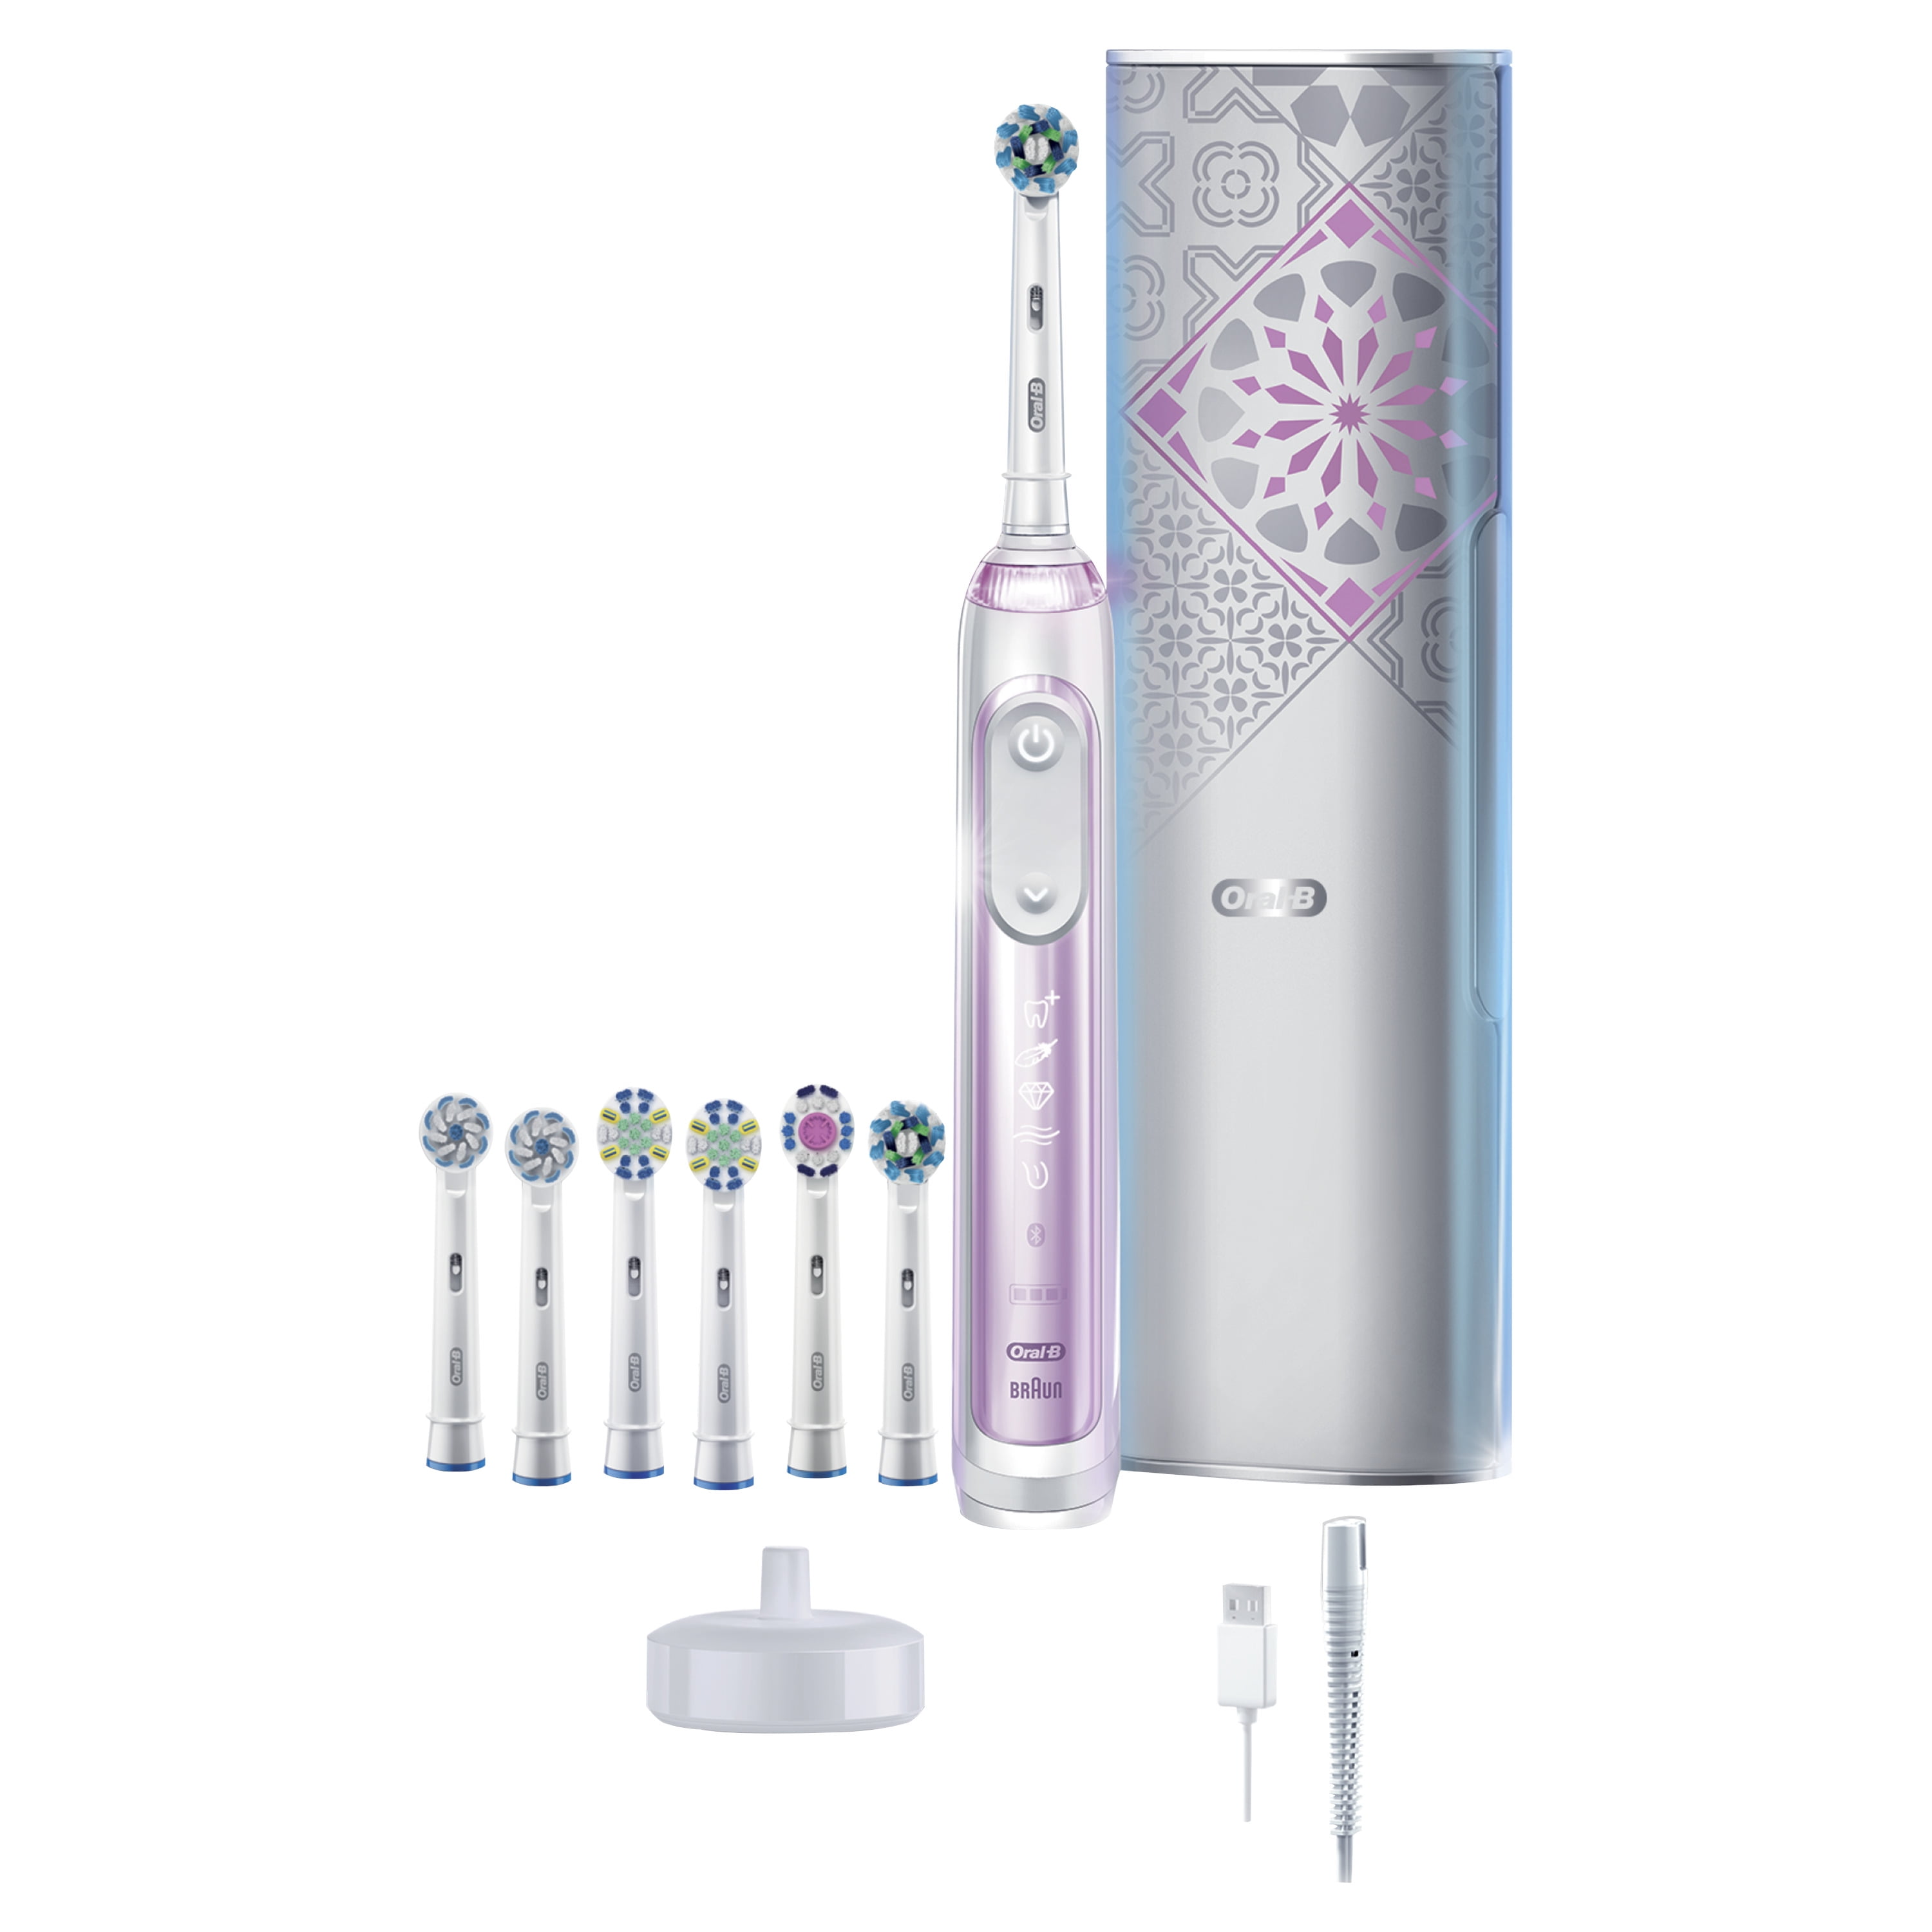 Oral-B Genius X Luxe Rechargeable Electric Toothbrush With Intelligence, 7 Brush Heads, 1 Travel Case, Sakura Pink